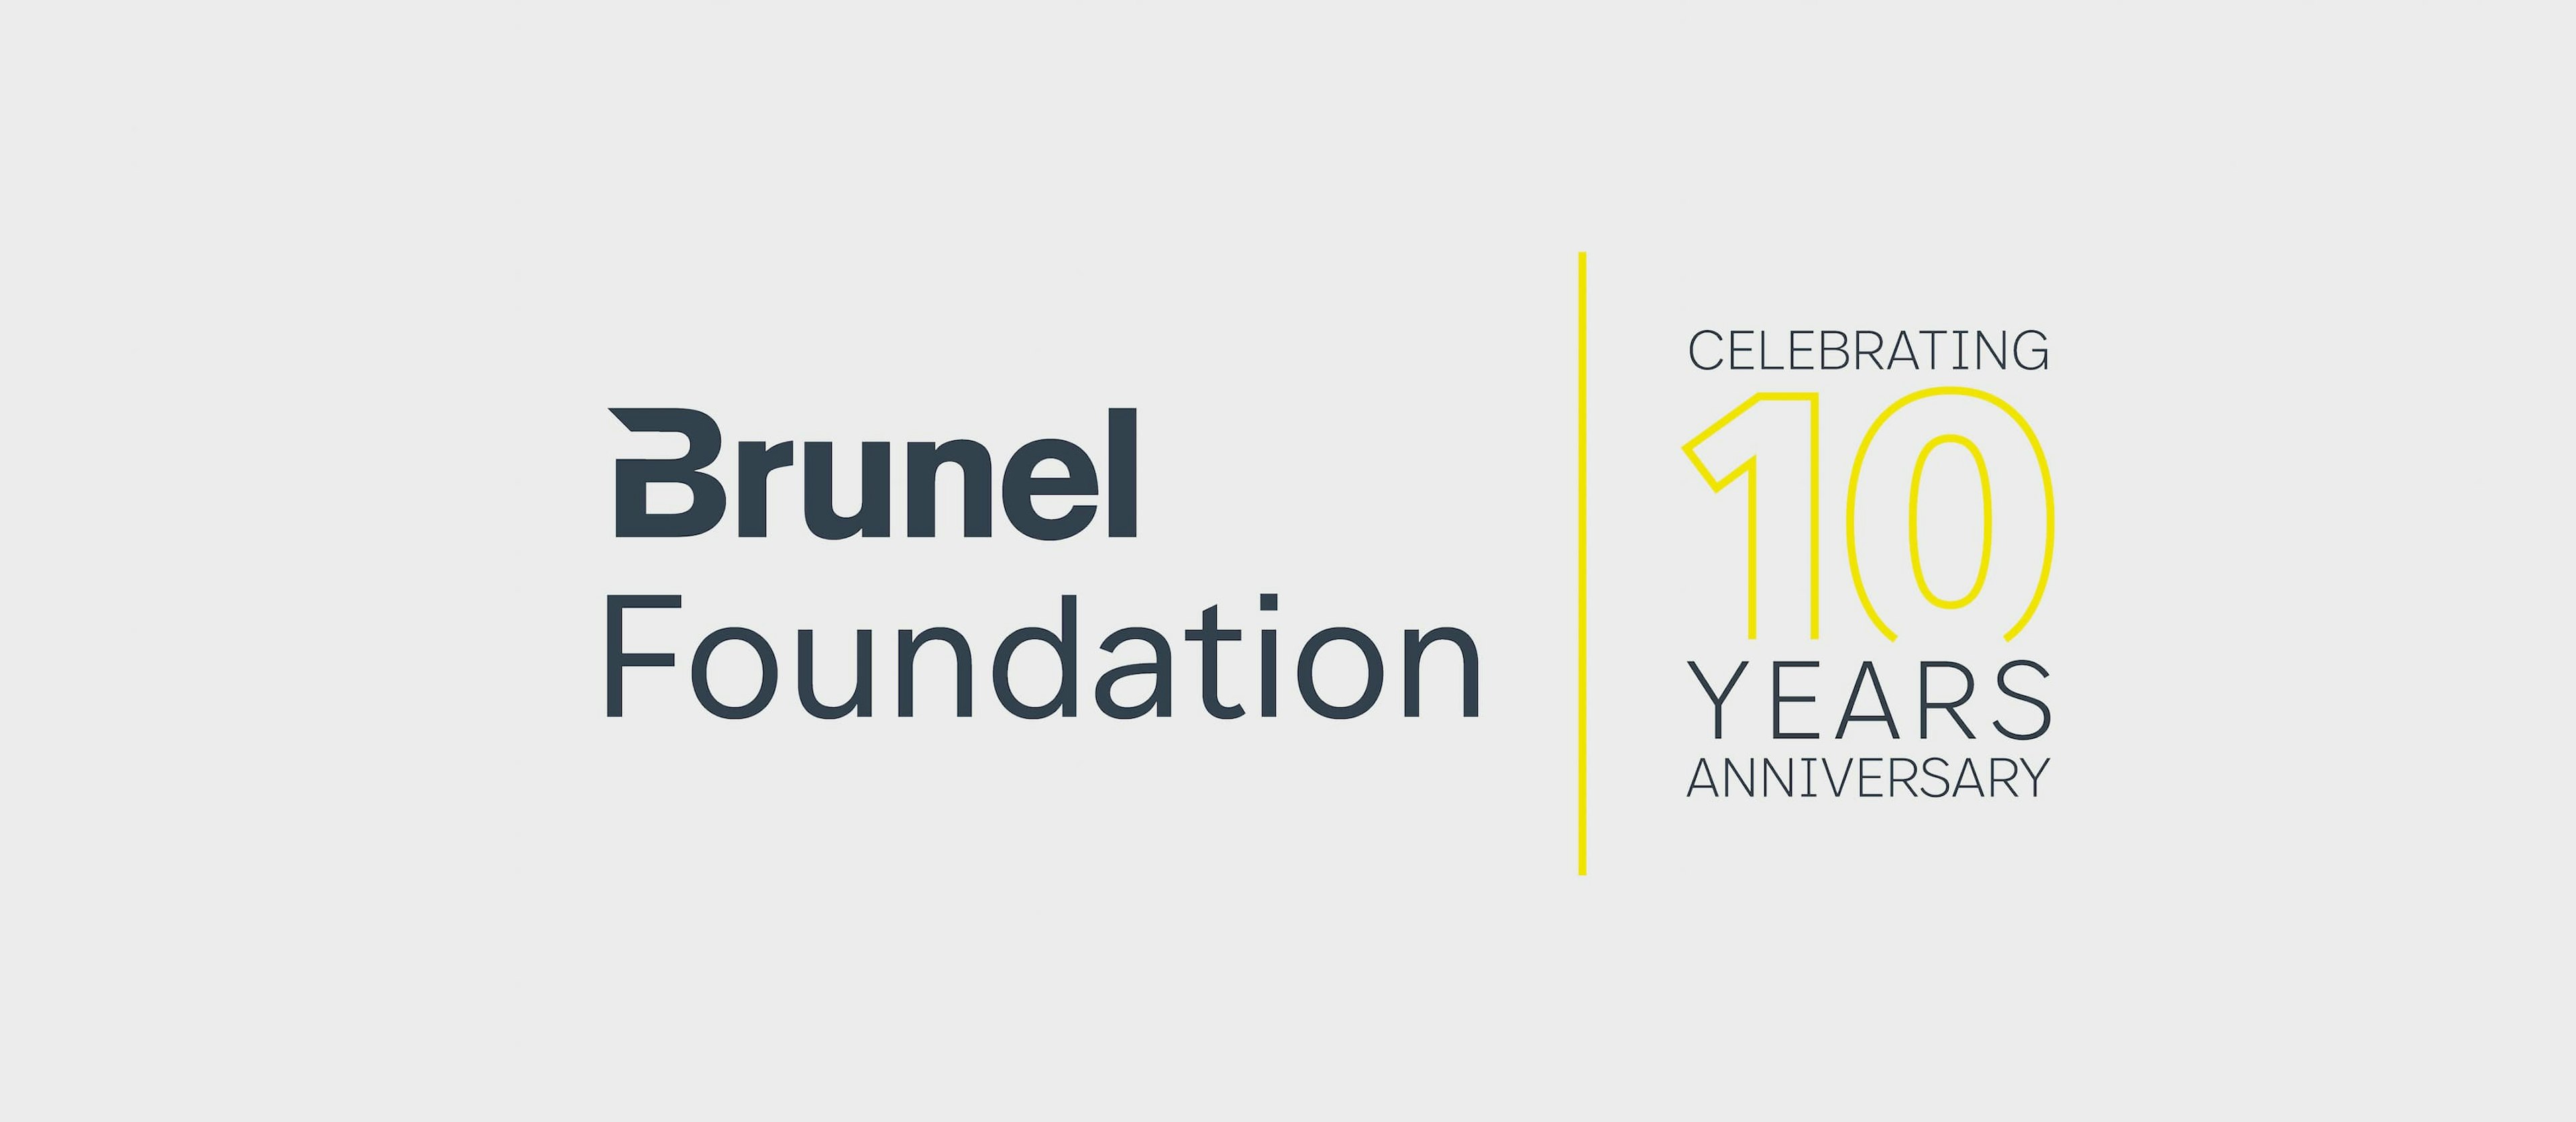 Celebrating the 10 year anniversary of the Brunel Foundation